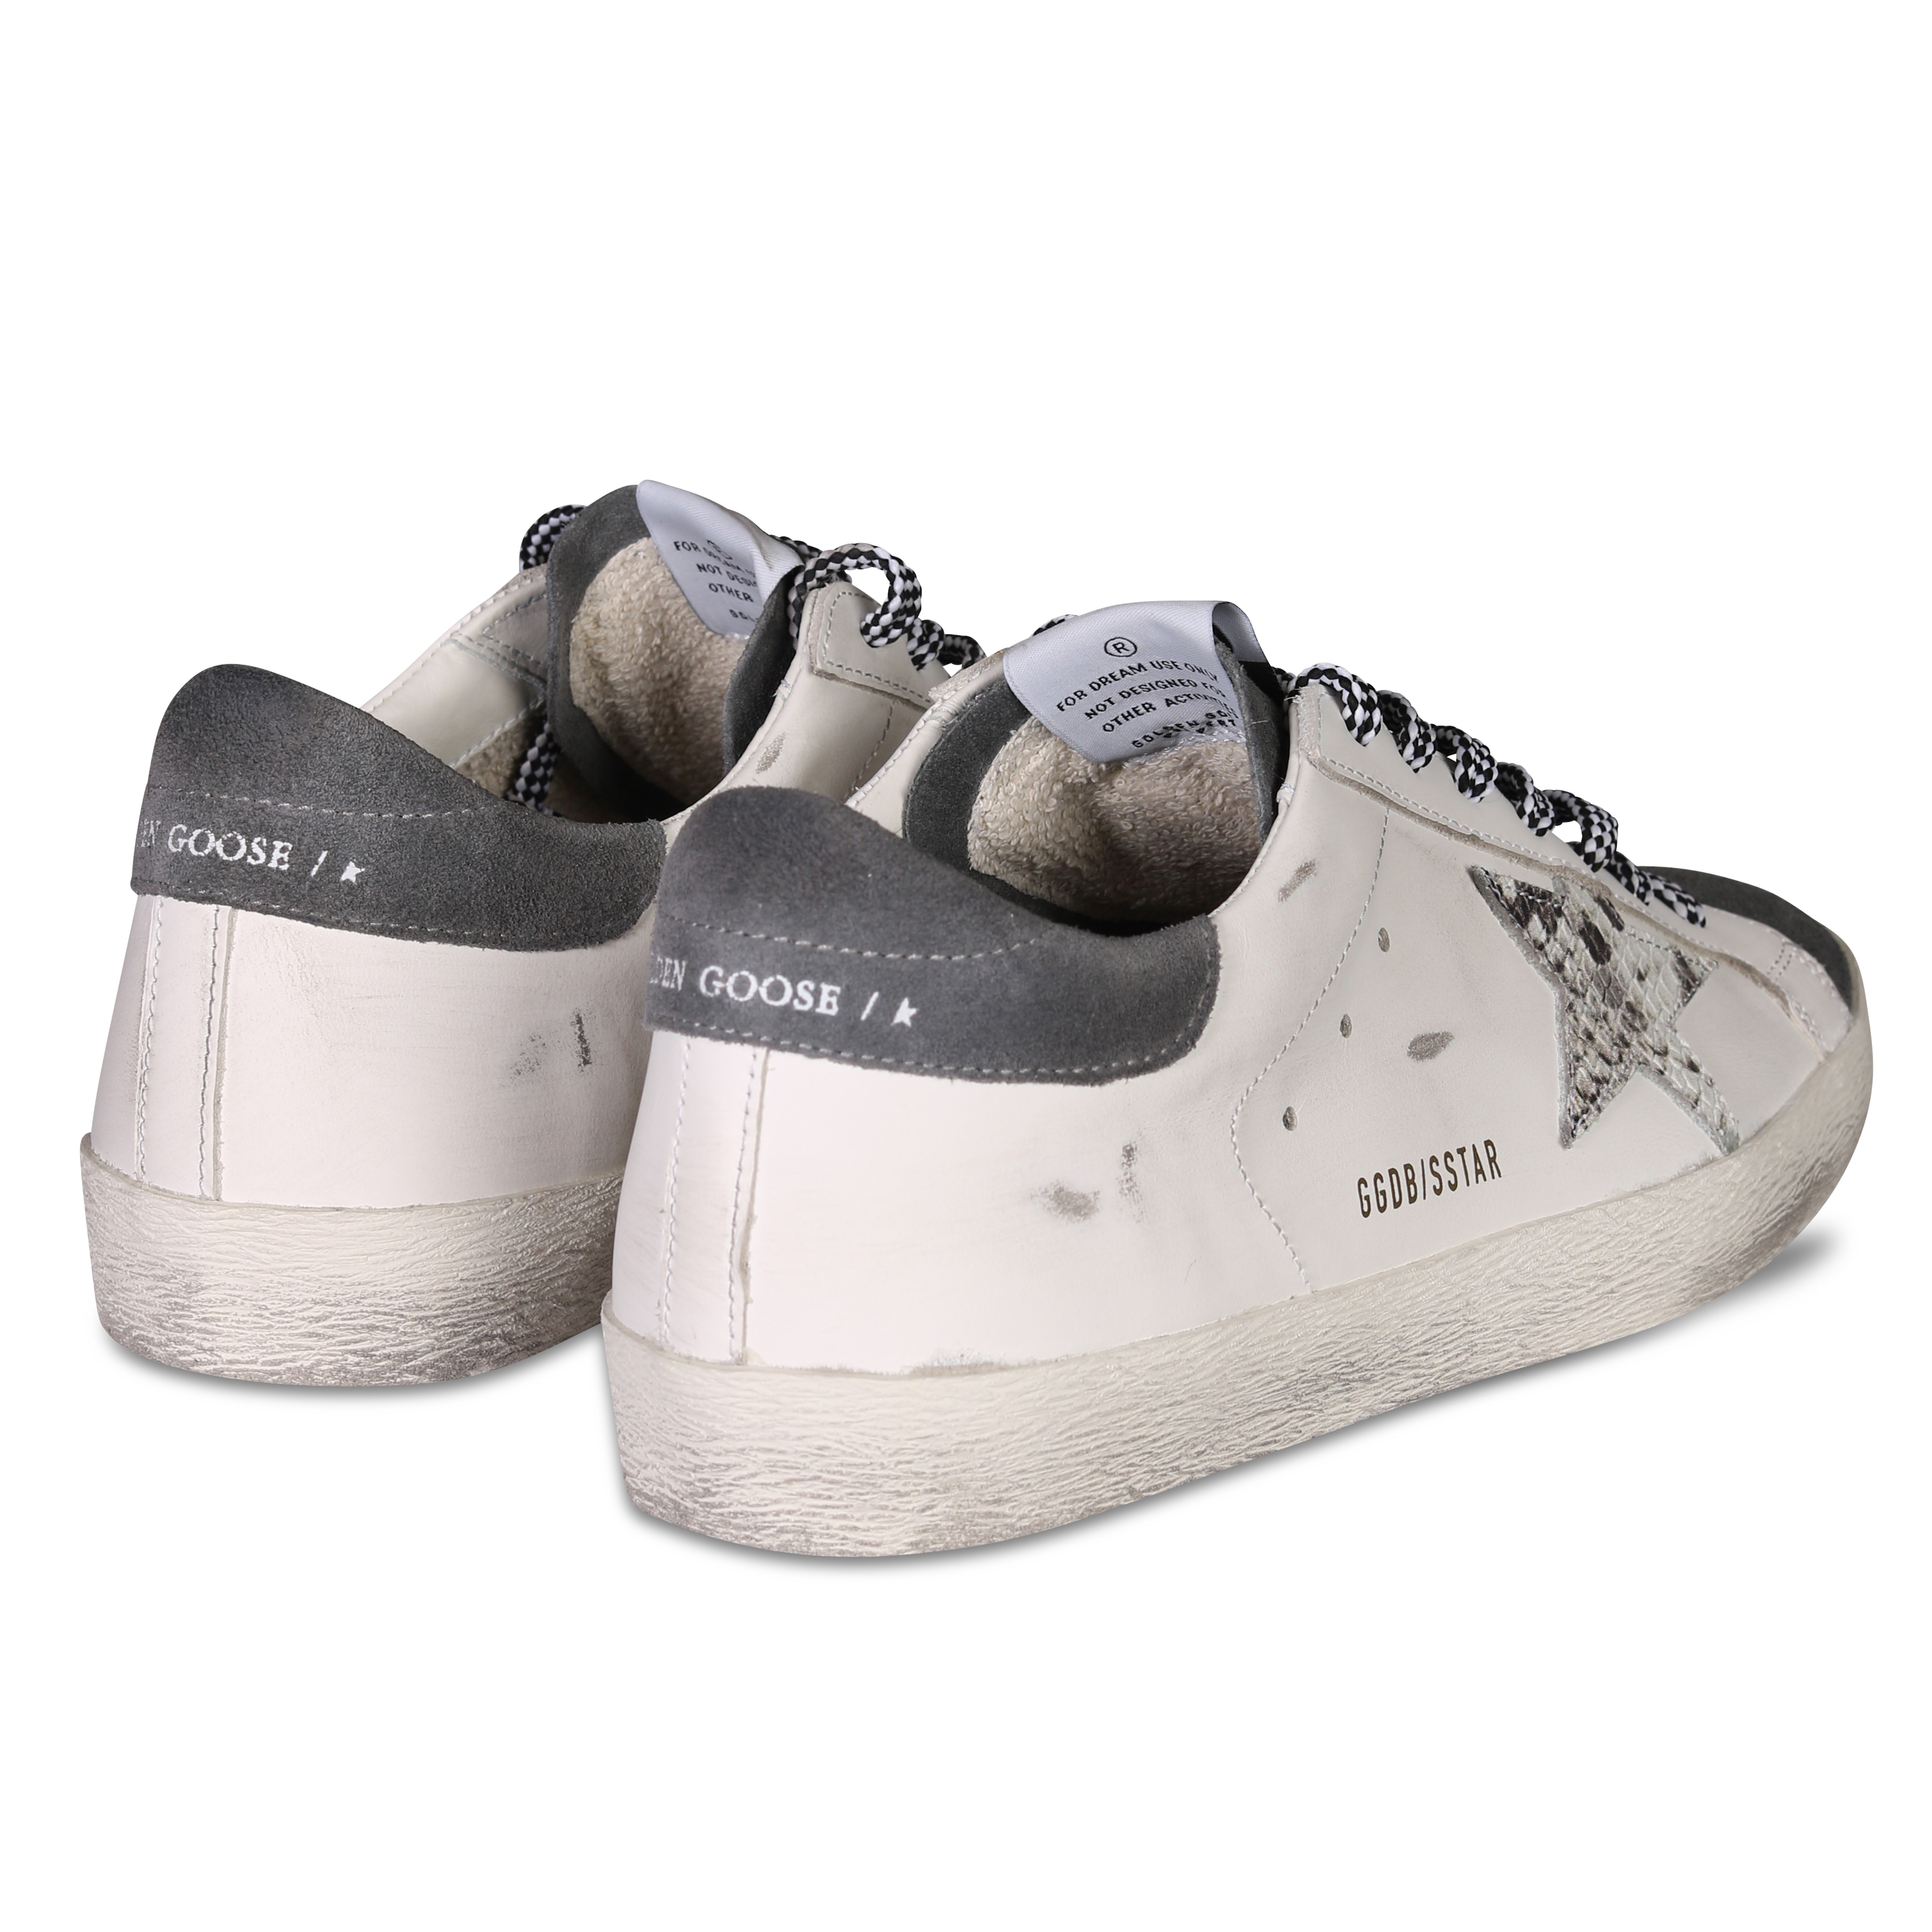 Golden Goose Sneaker Super-Star Classic With List in White Grey